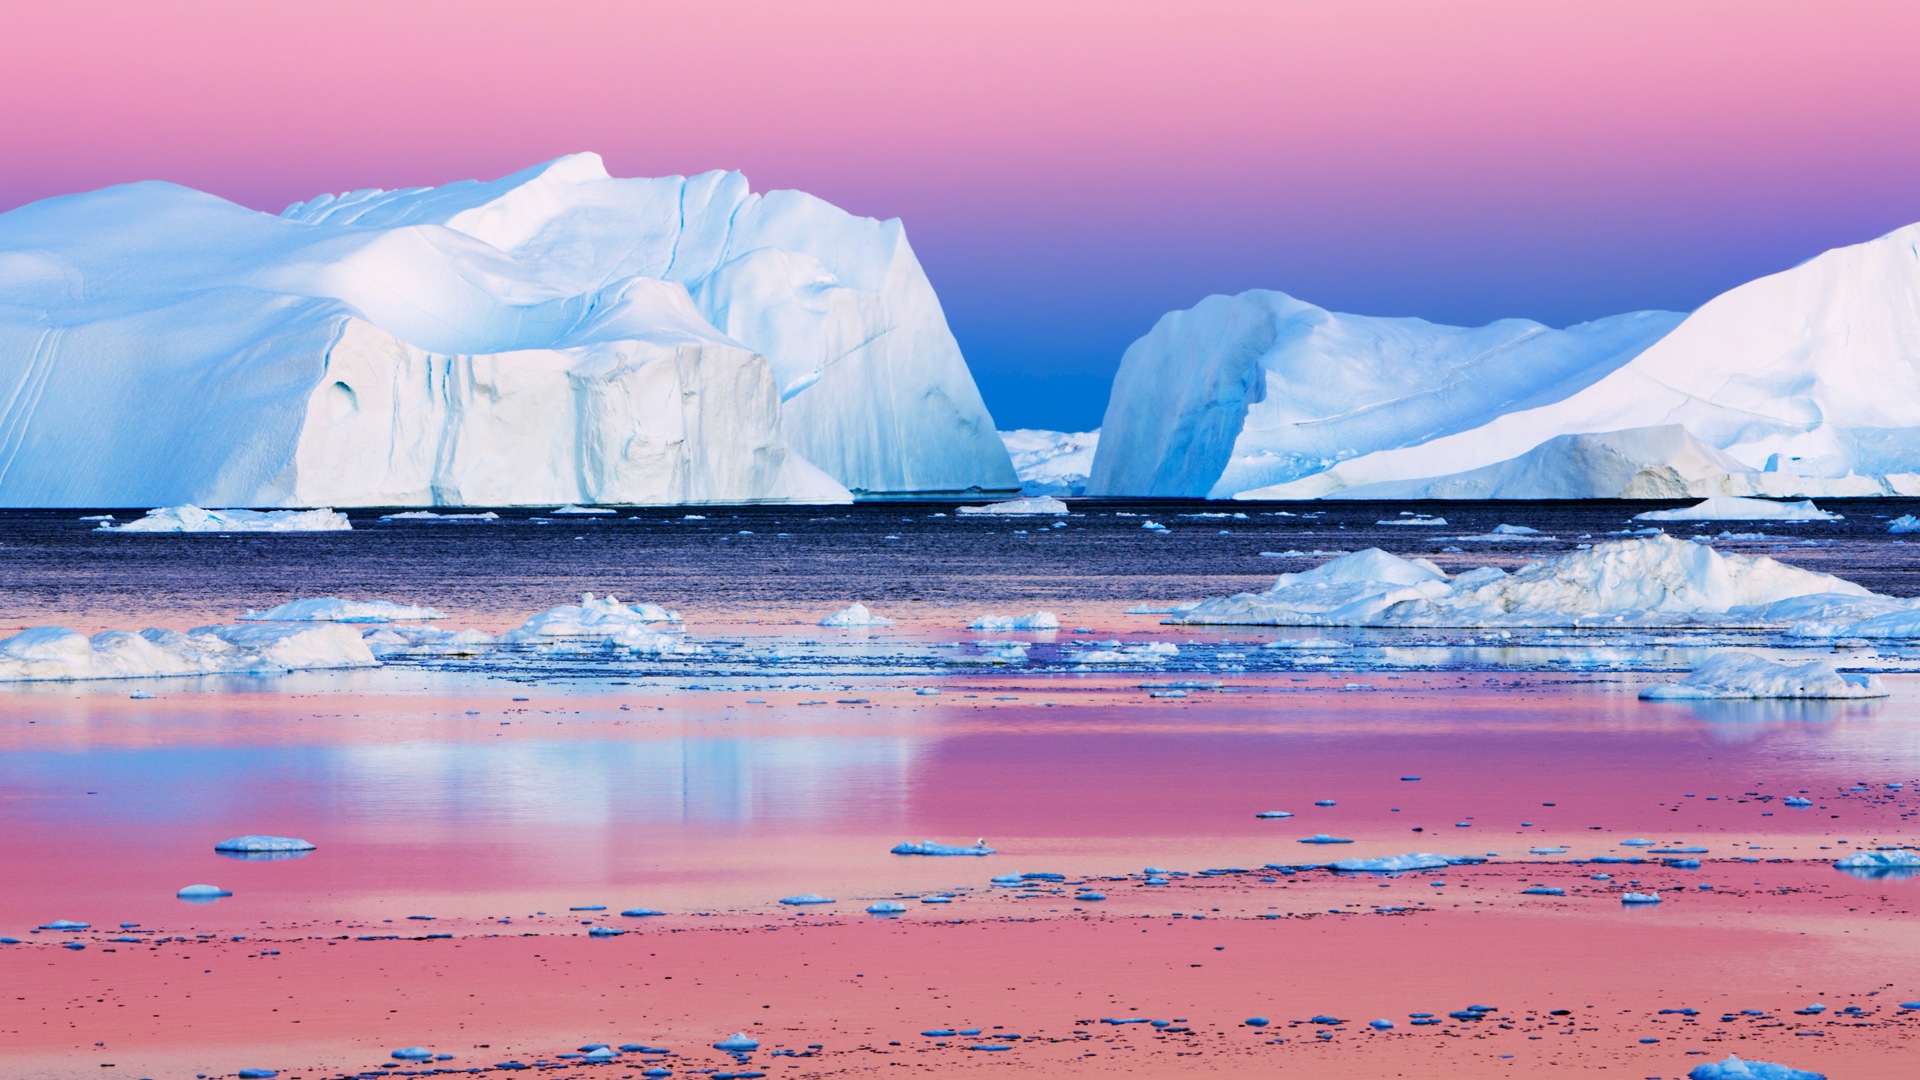 Windows 8 Wallpapers: Arctic, the nature ecological landscape, arctic animals #7 - 1920x1080